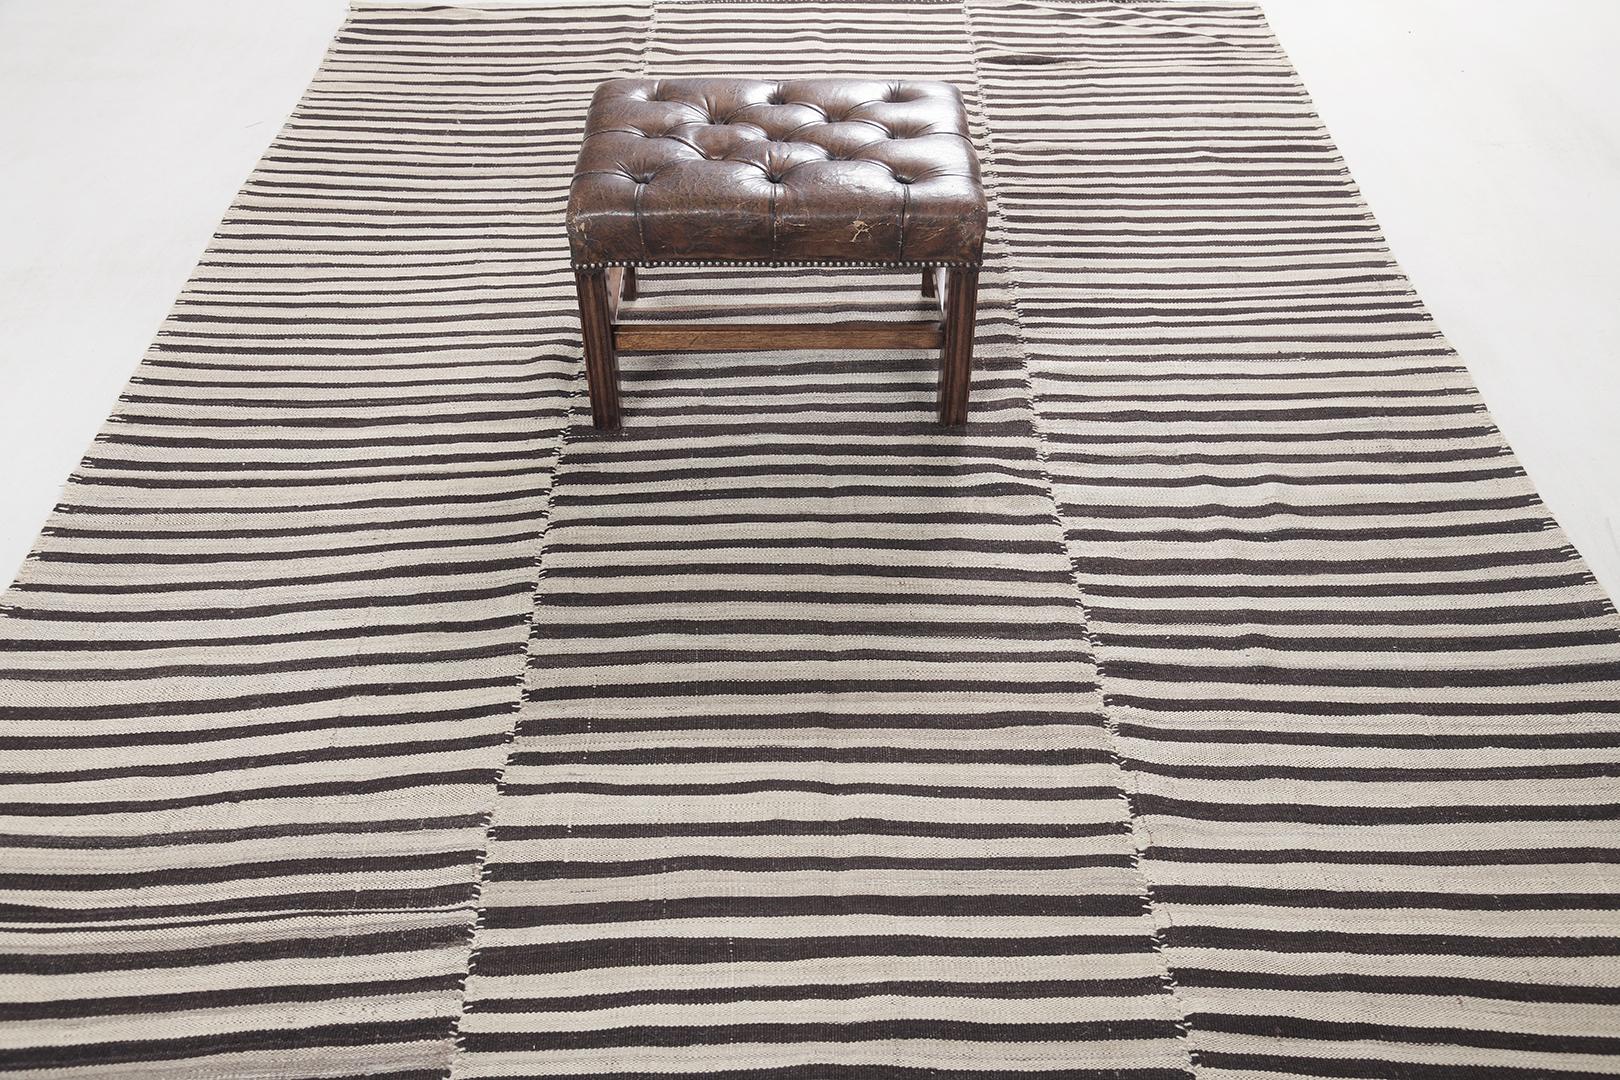 This Persian Jejim Kilim is a banded flat weave with alternating hues of cream, khaki, and clay brown in multi-column stripes. Persian flatweaves are made up of some of the best wool and weaved exceptionally to create interesting textures. This